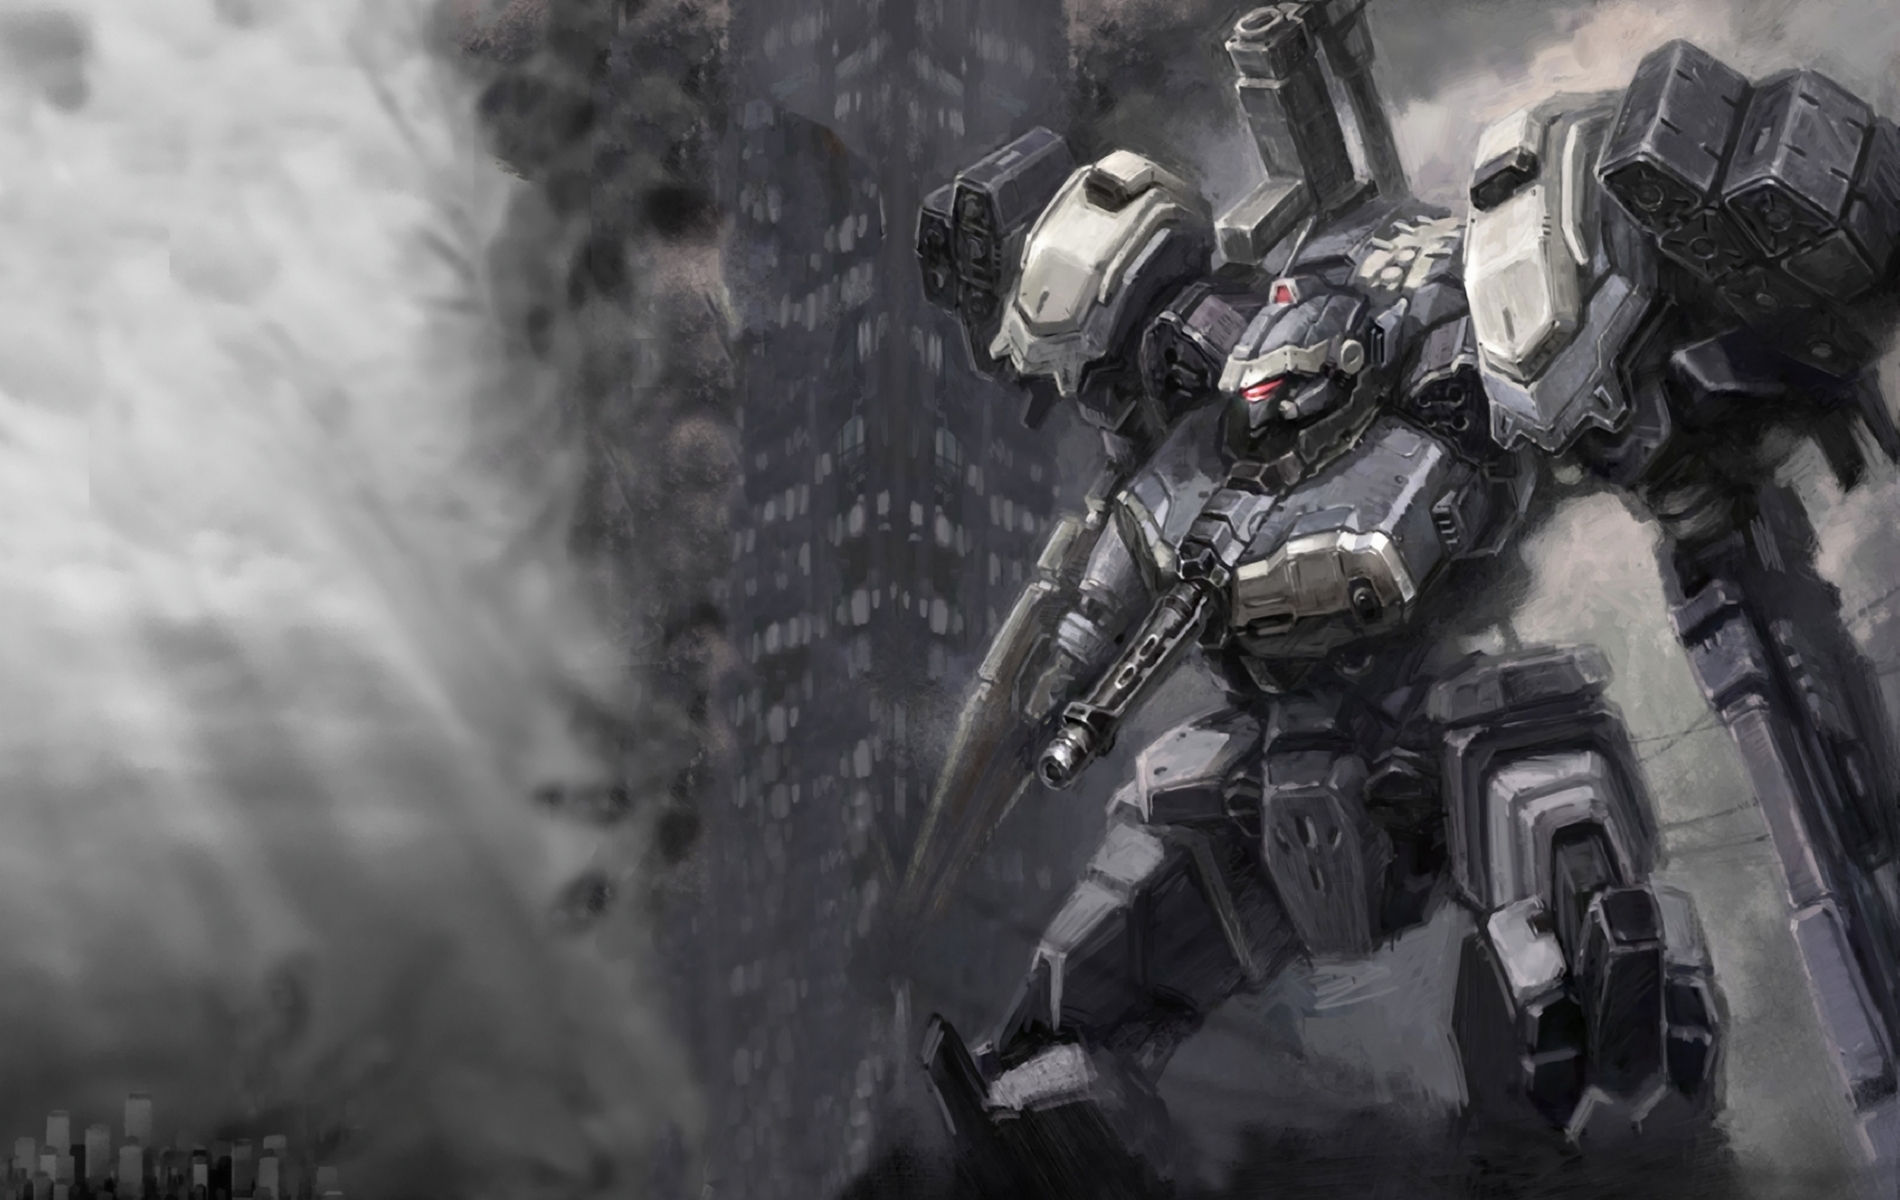 I made Armored Core wallpapers for my iPhone using images I found around  and adapted them : r/armoredcore